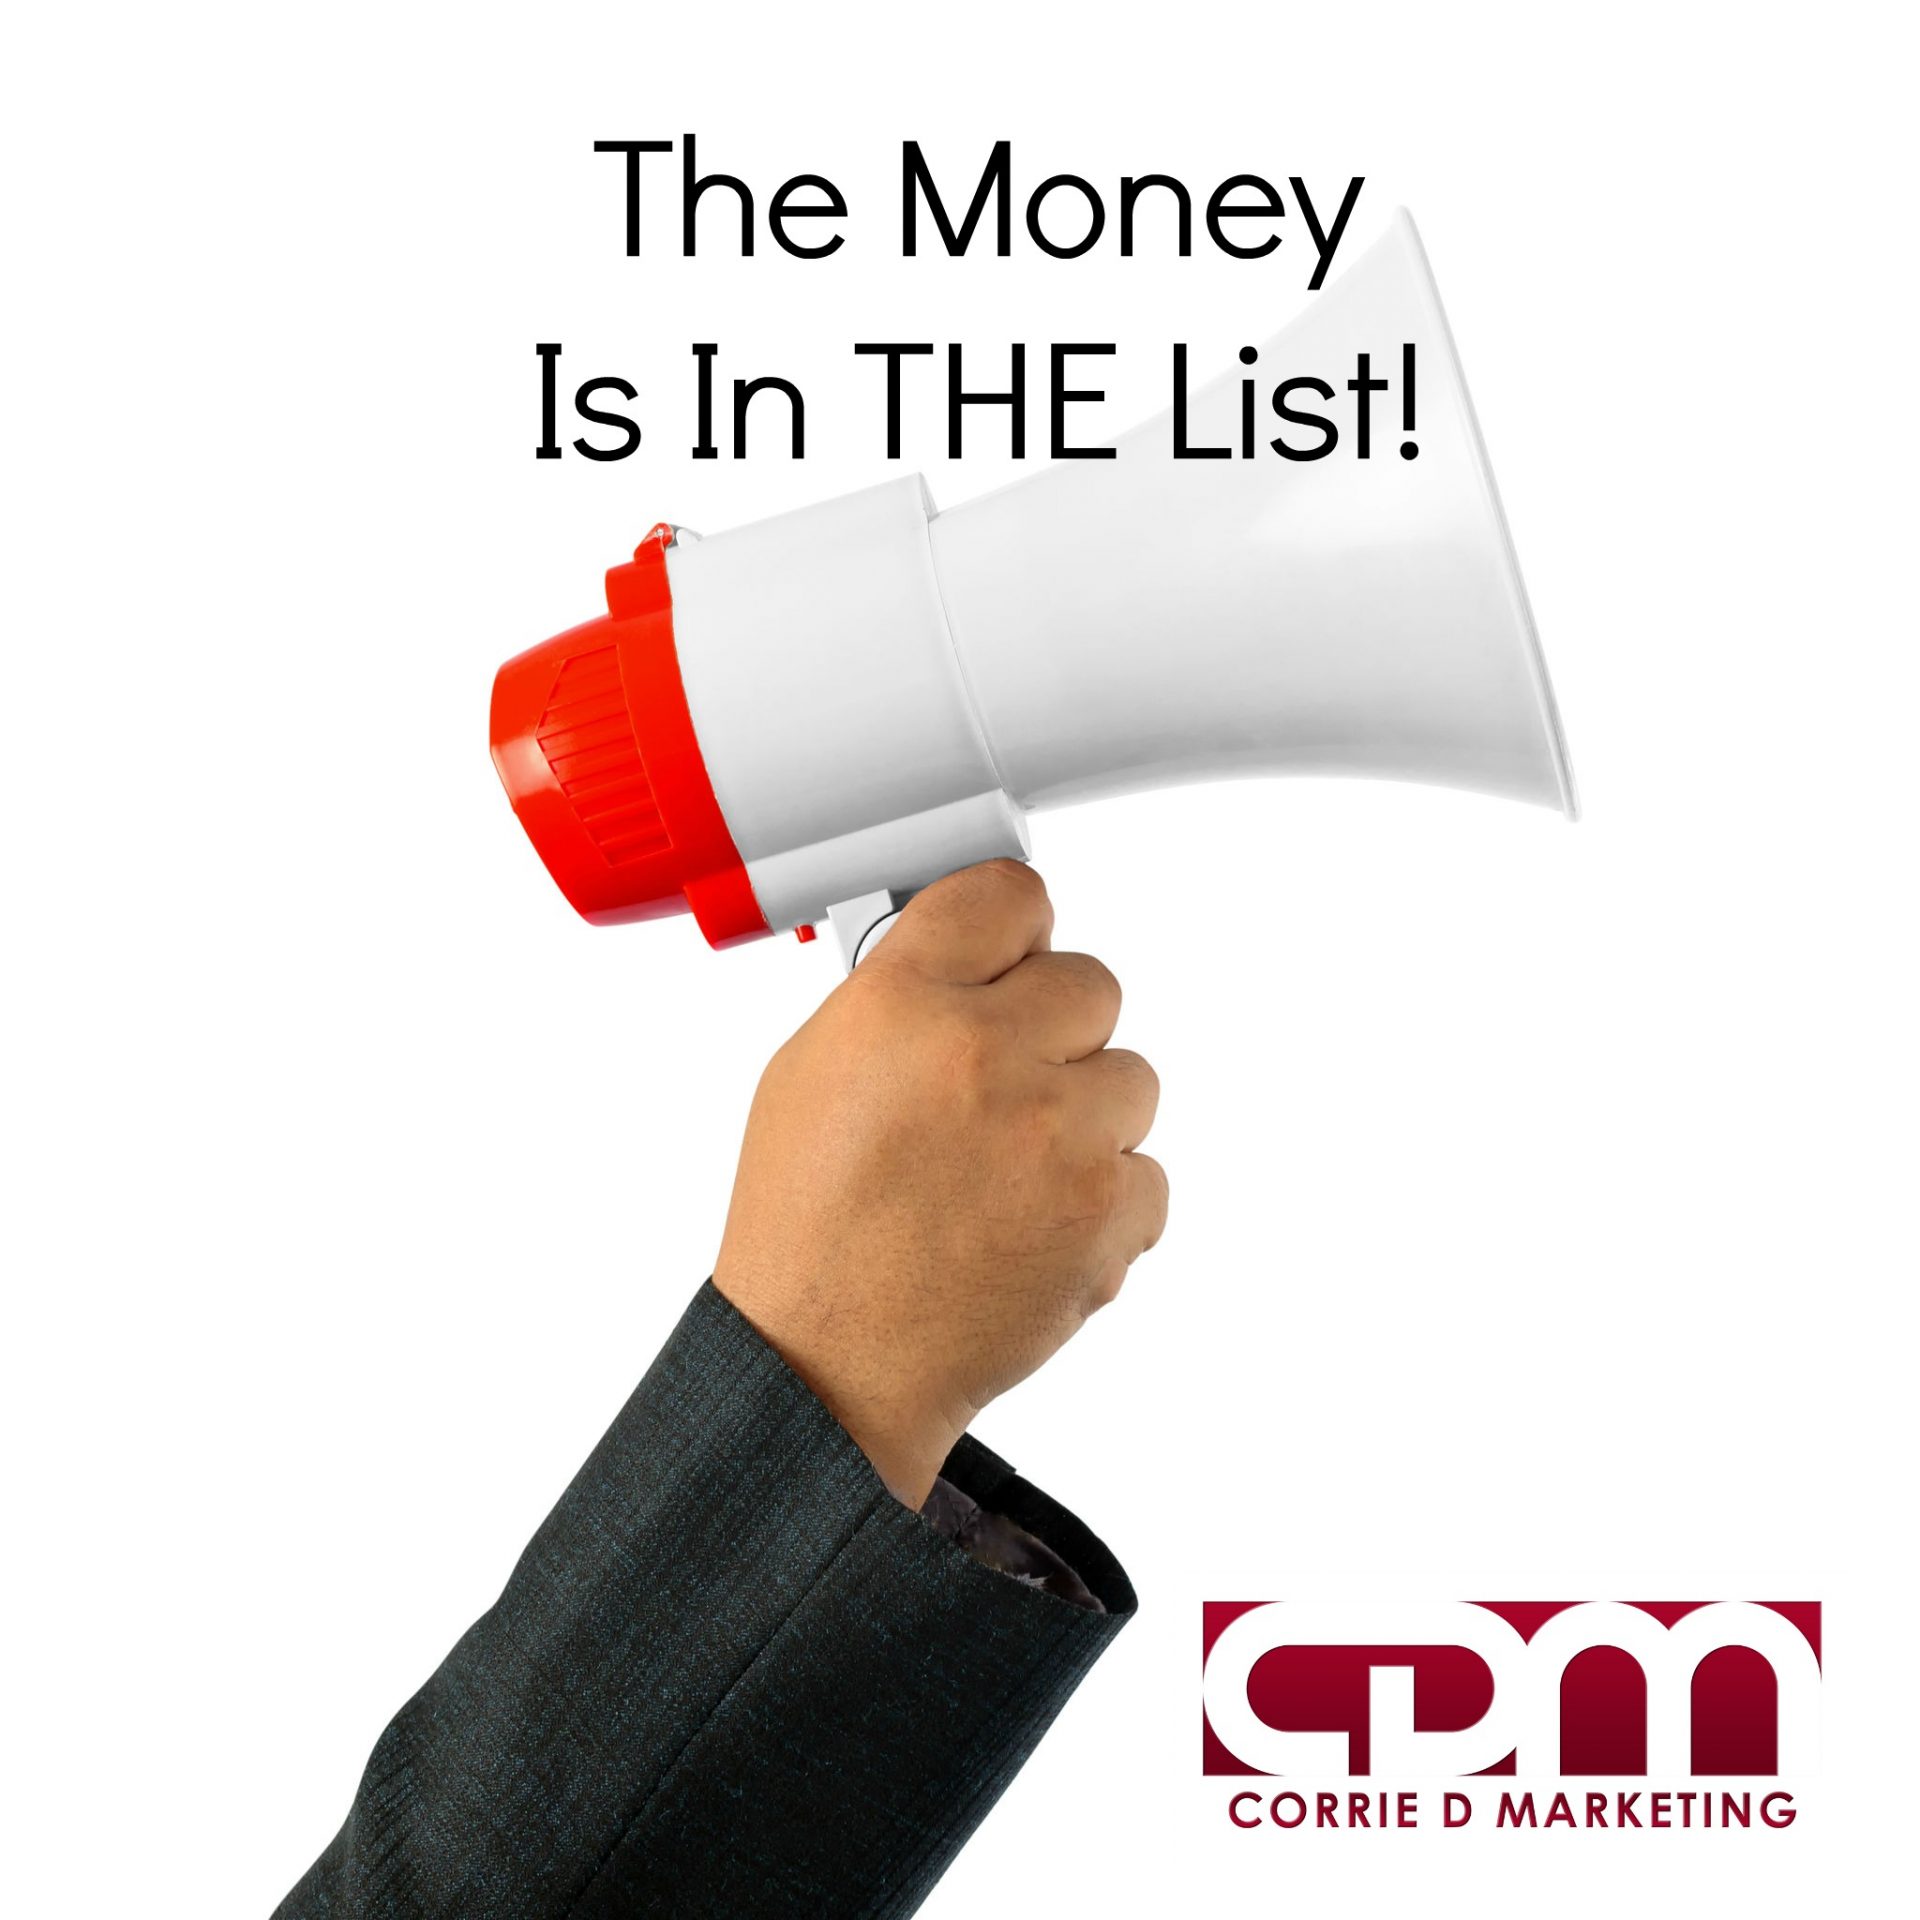 Corrie D Marketing Email Marketing The Money Is In THE List